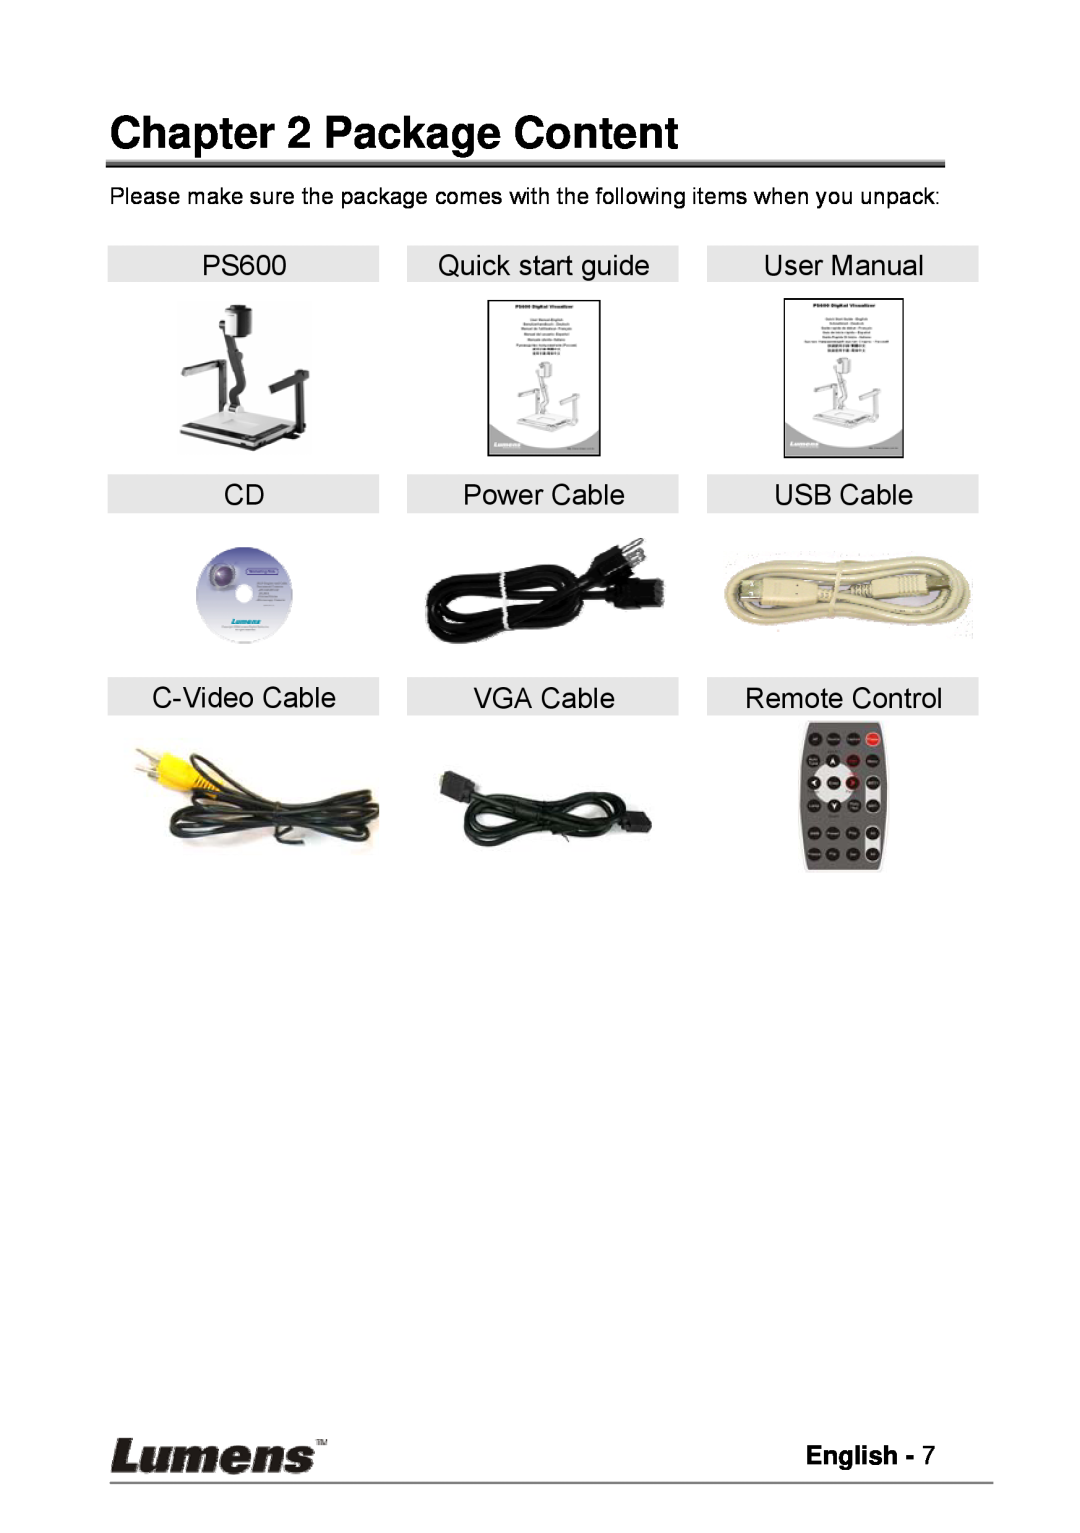 Lumens Technology PS600 Package Content, Quick start guide, User Manual, Power Cable, USB Cable, C-Video Cable, VGA Cable 